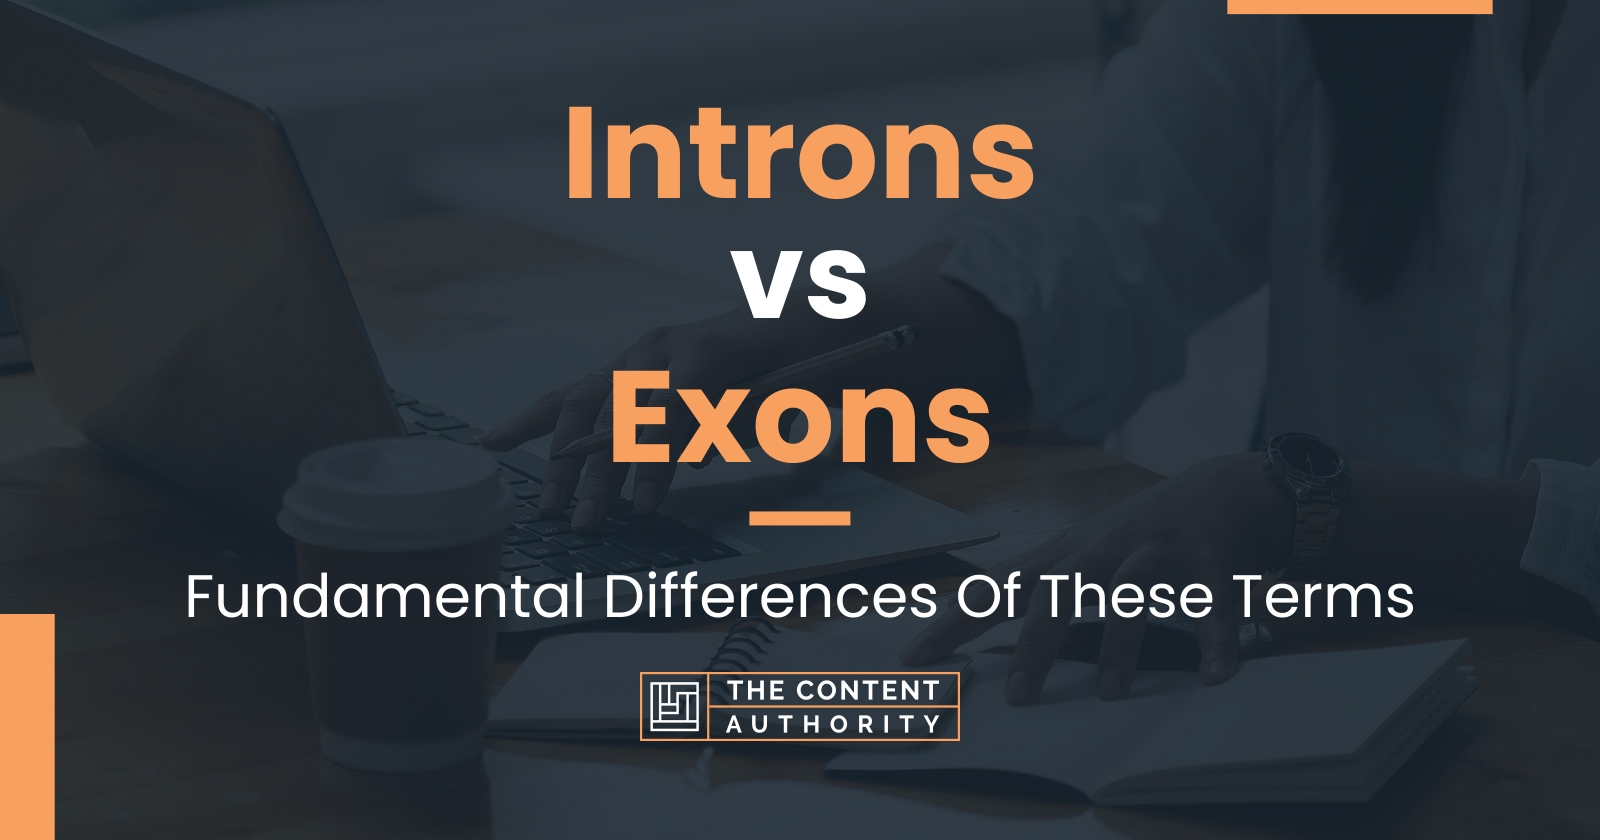 Introns vs Exons: Fundamental Differences Of These Terms